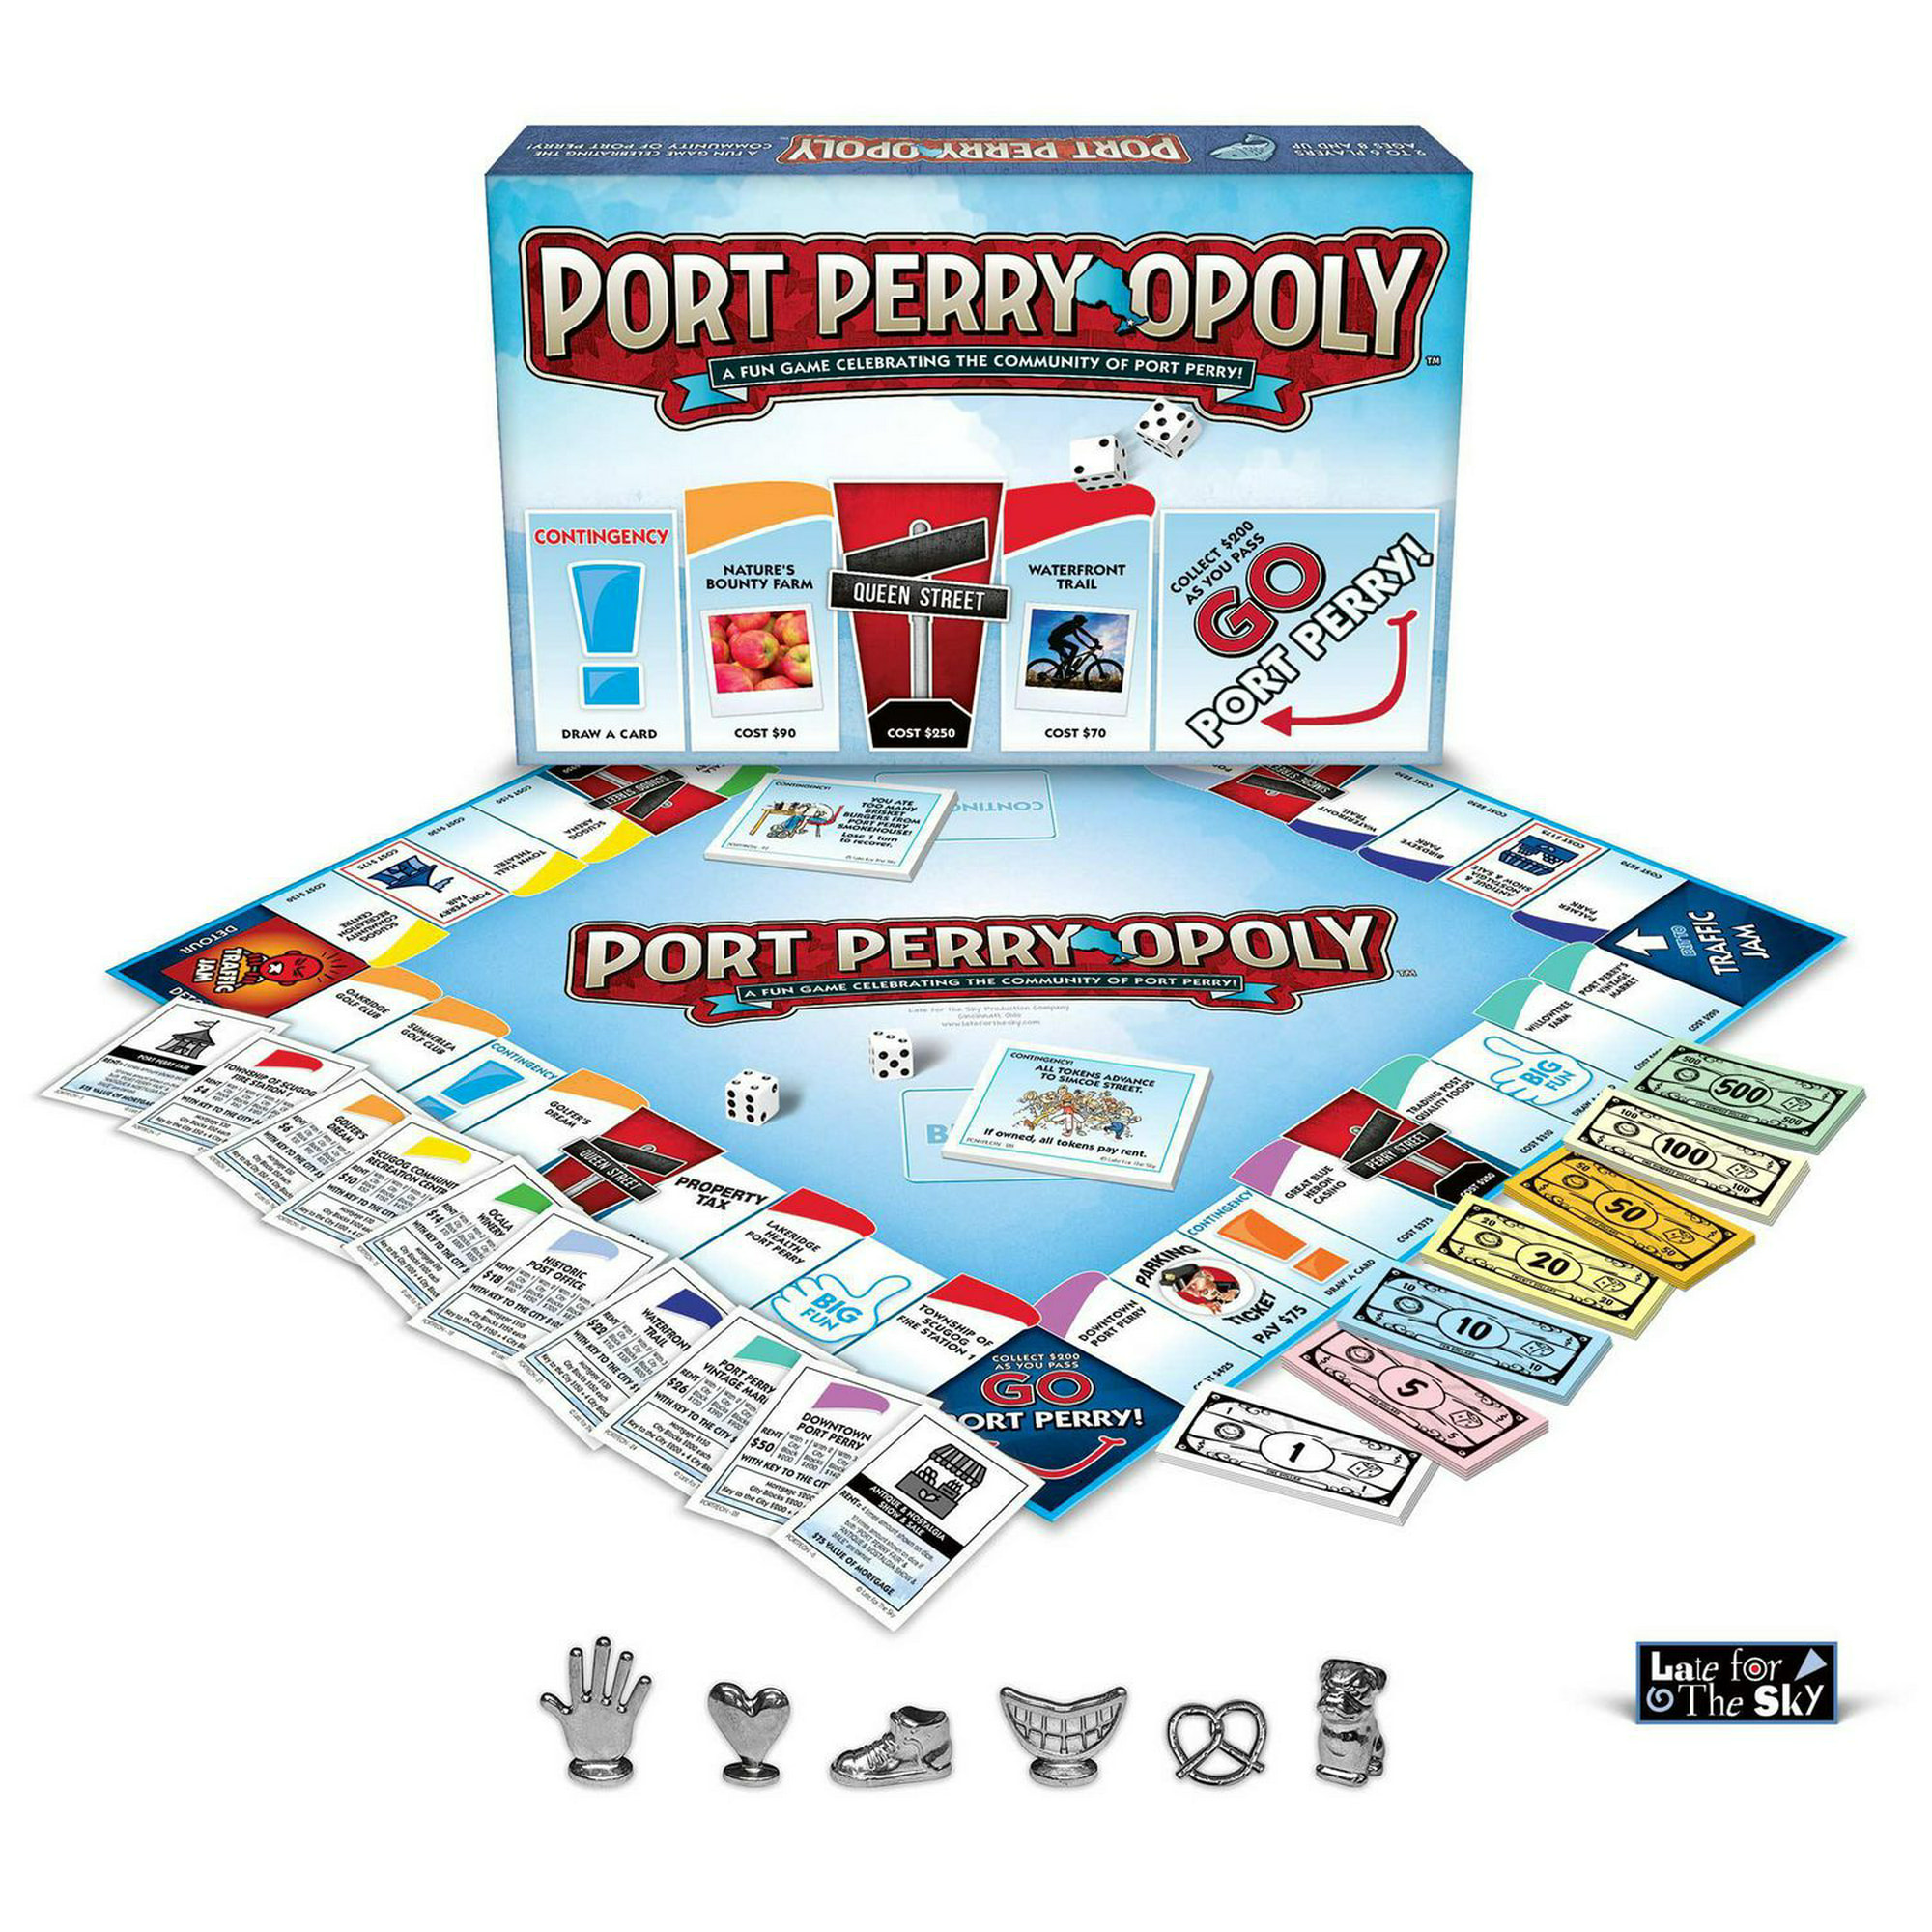 Port Perry-Opoly 